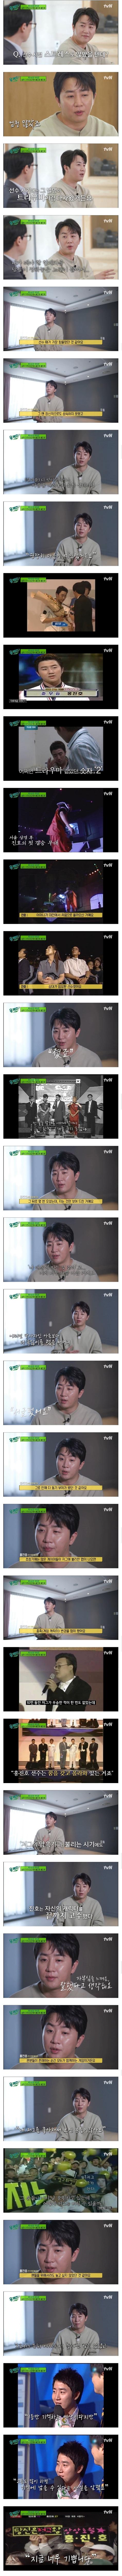 It's humorous now, but Hong Jin-ho said it was very difficult during his time as a player.